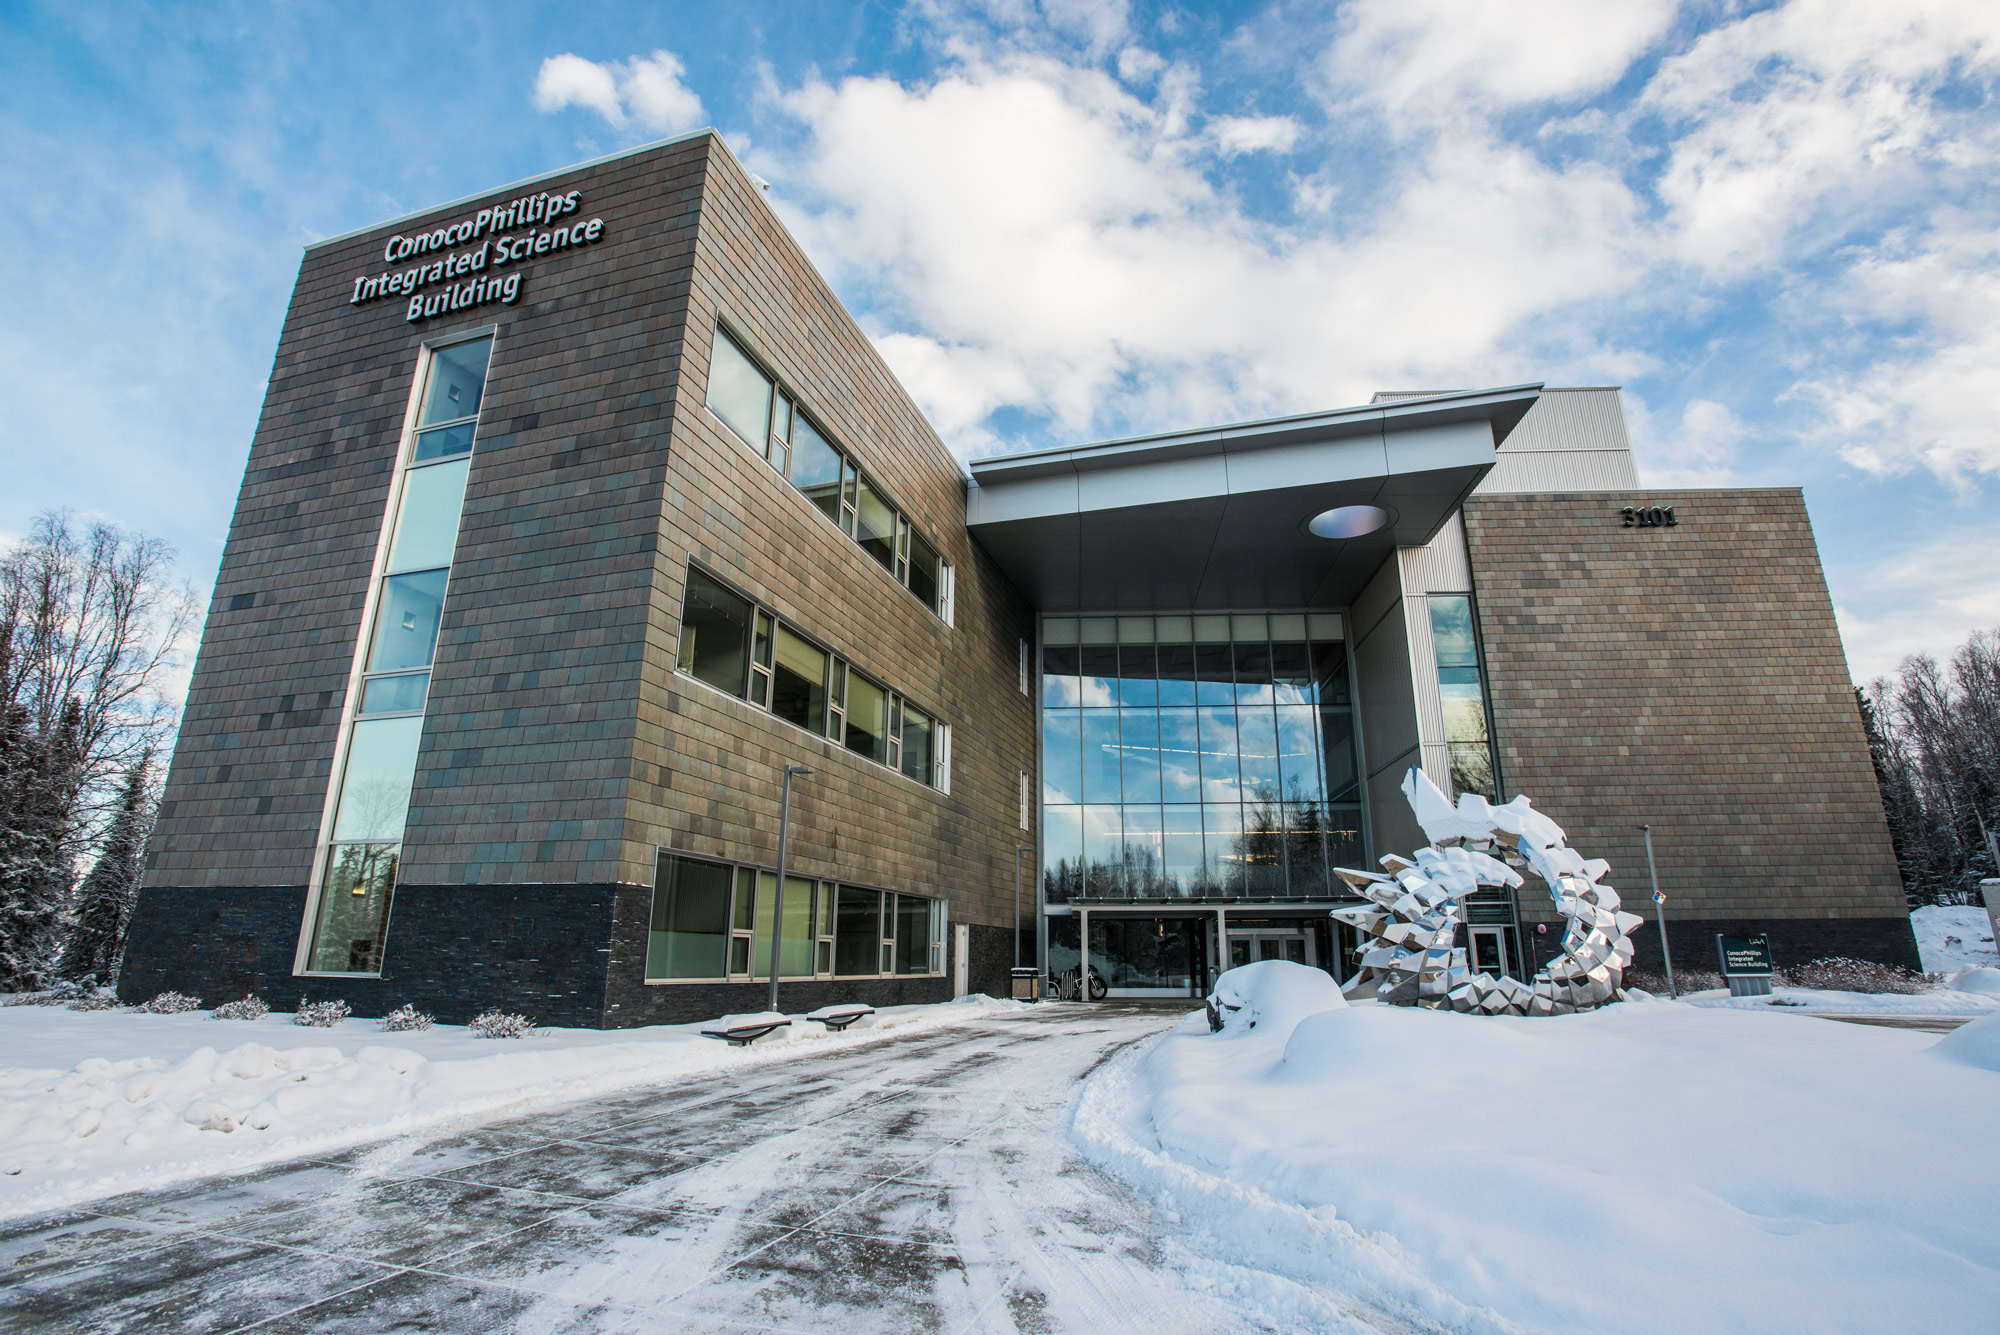 UAA's ConocoPhillips Integrated Science Building.